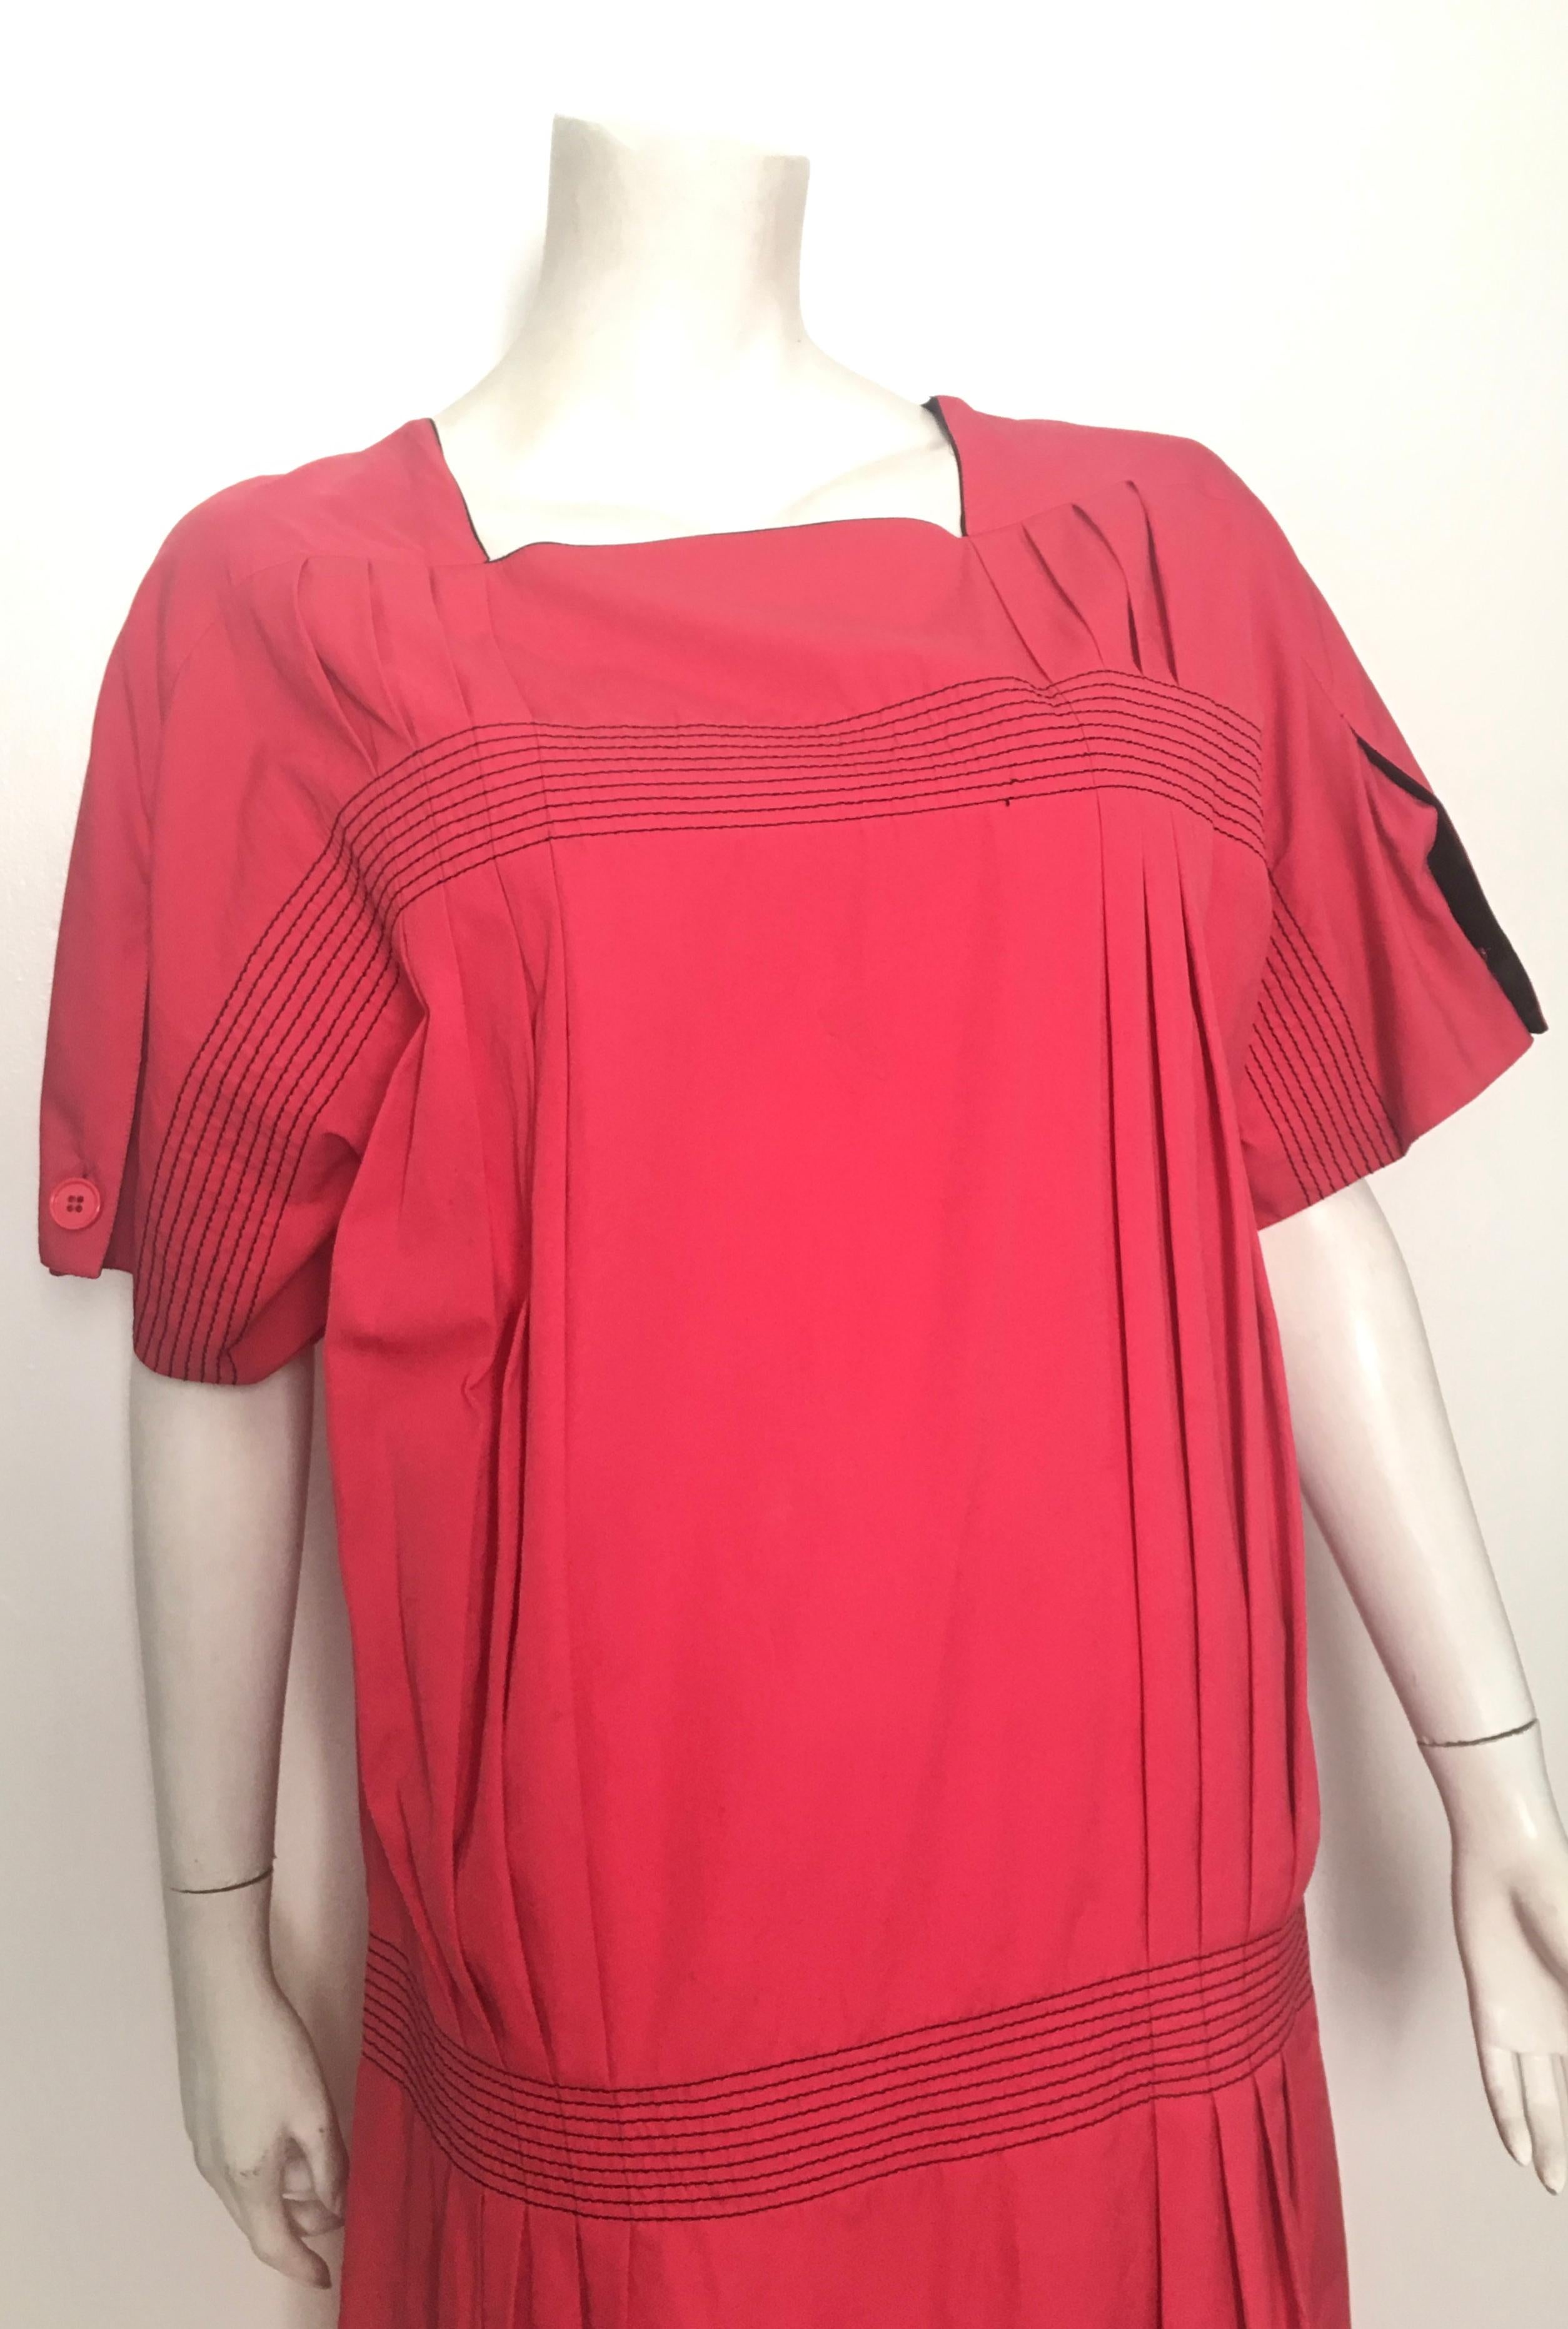 Gianfranco Ferre 1980s cotton loose fitting cut short sleeve dress is an Italian size 42 and will fit a size 6 / 8.  This design is reminiscent of a 1920s design that was meant to be big and boxy.   Gorgeous salmon red color with pleats adds a real